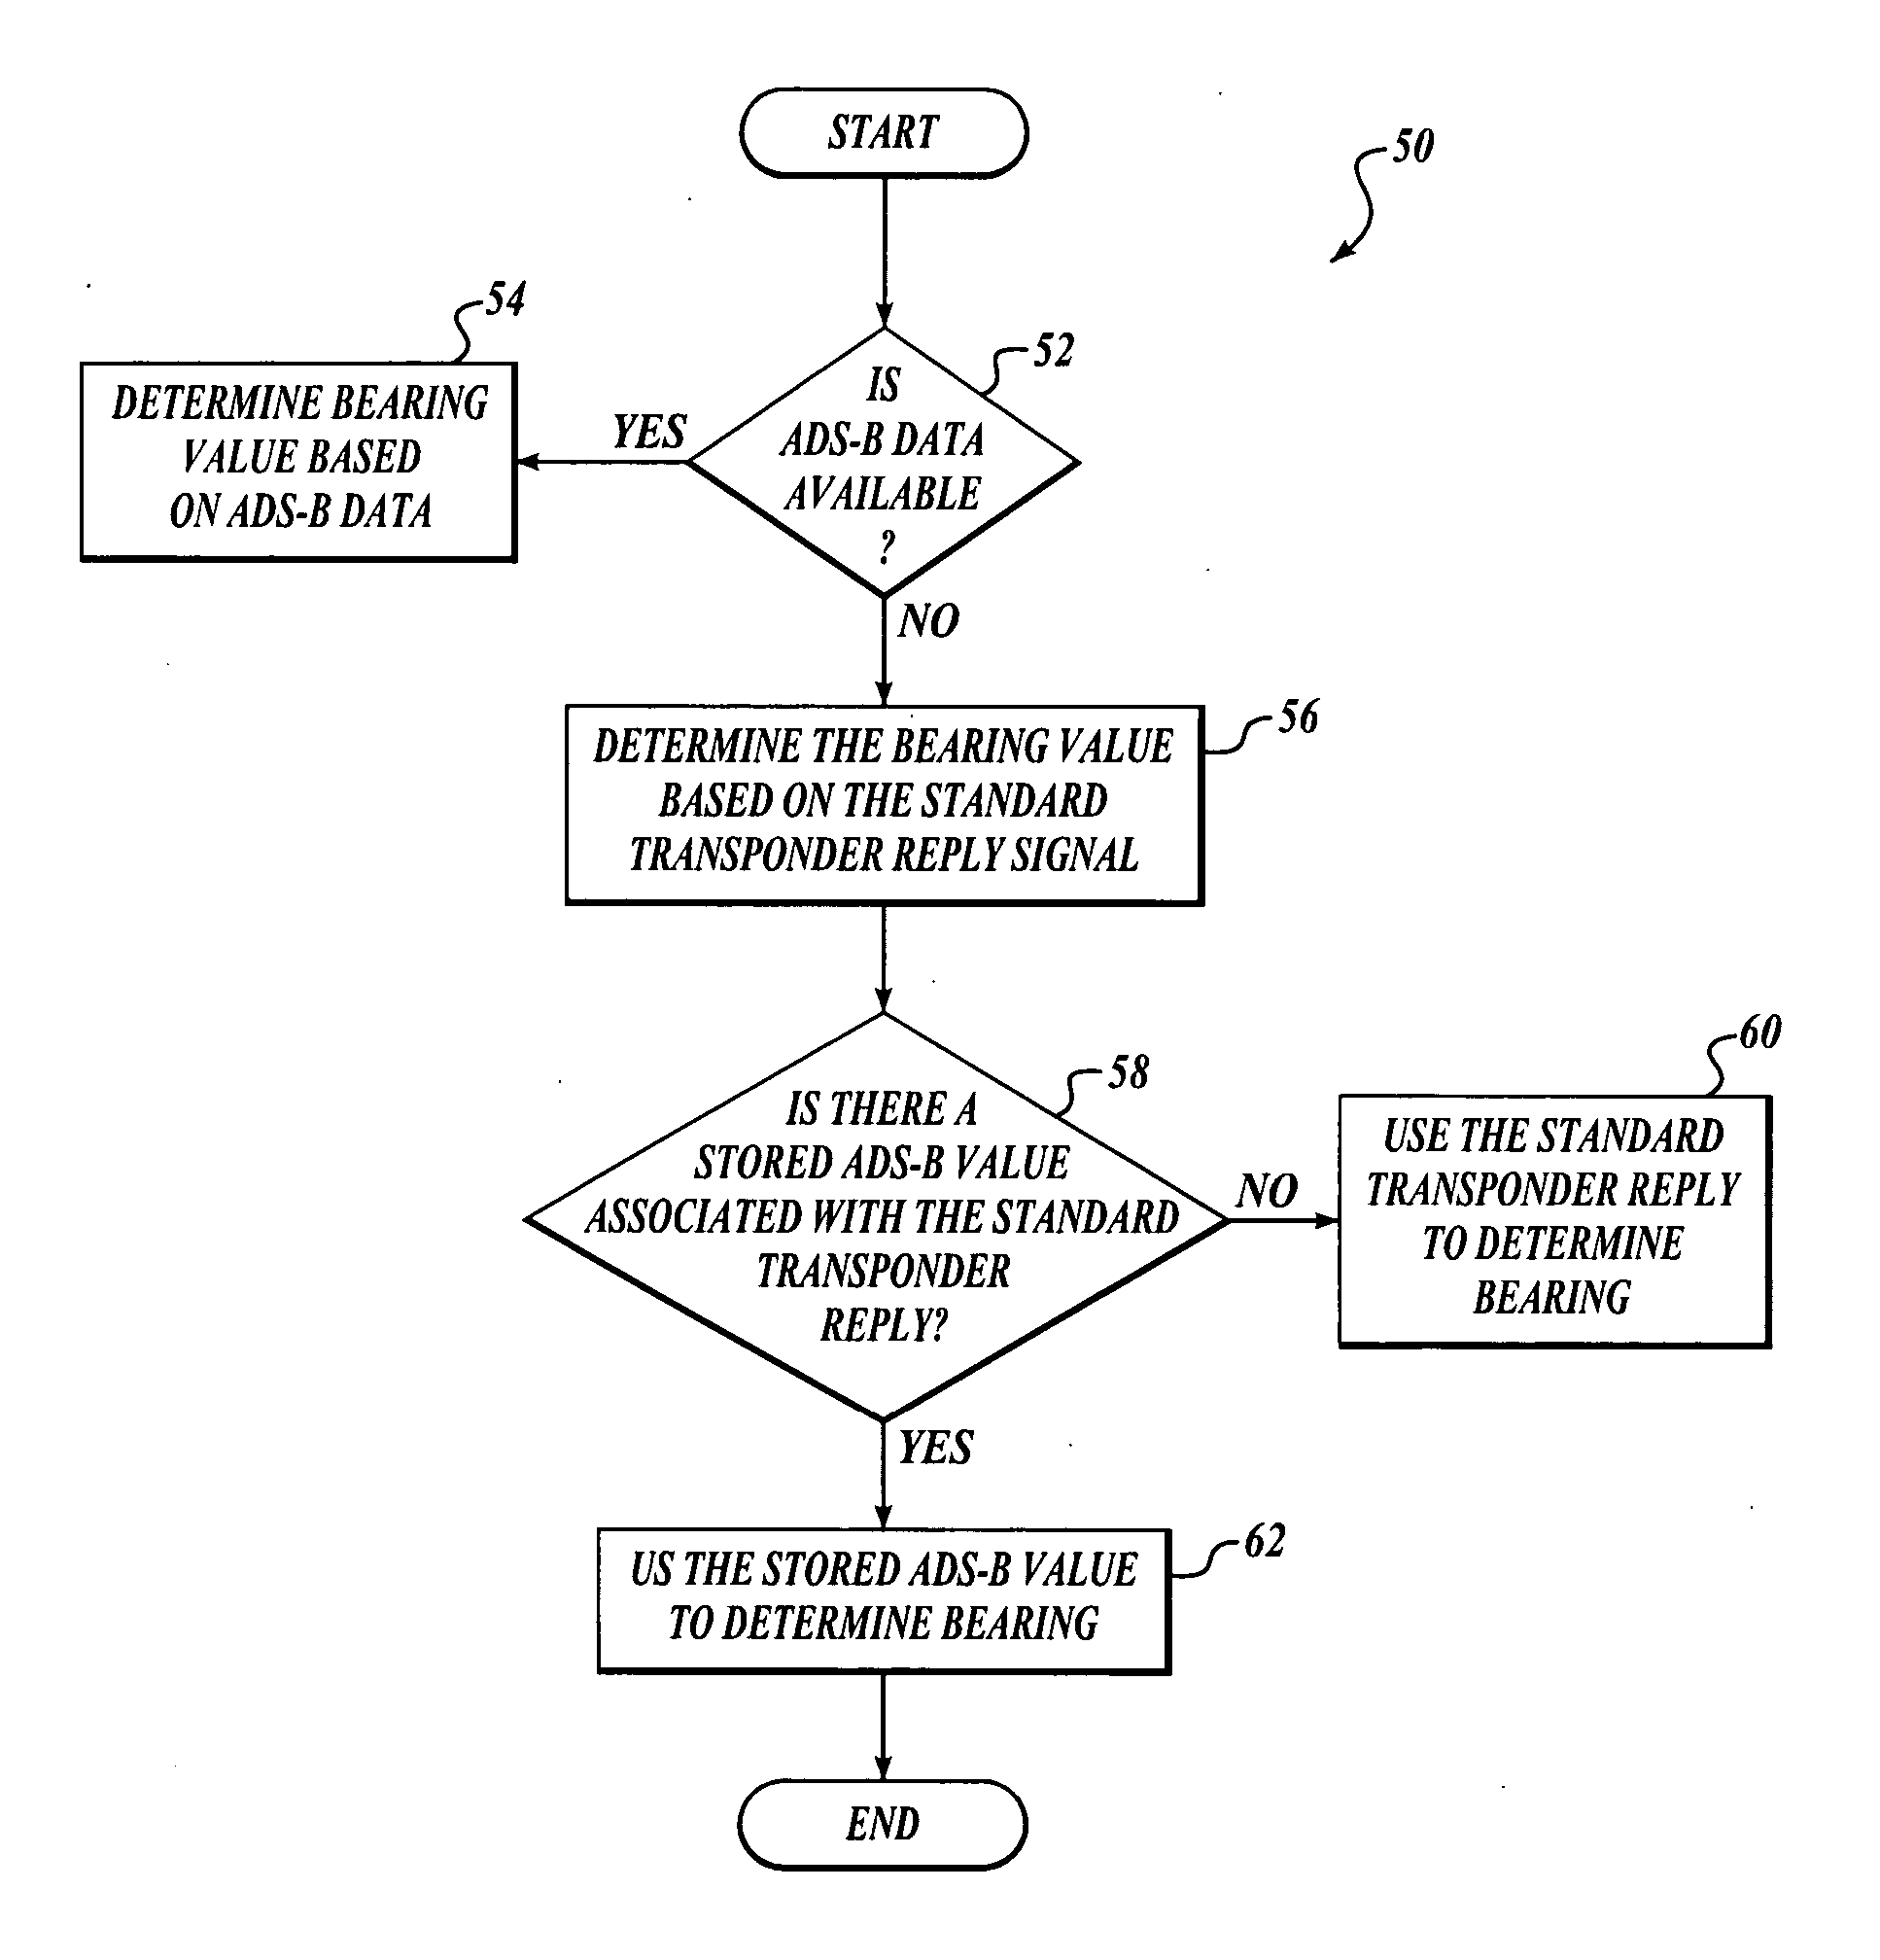 Traffic alert collision avoidance system (TCAS) devices and methods